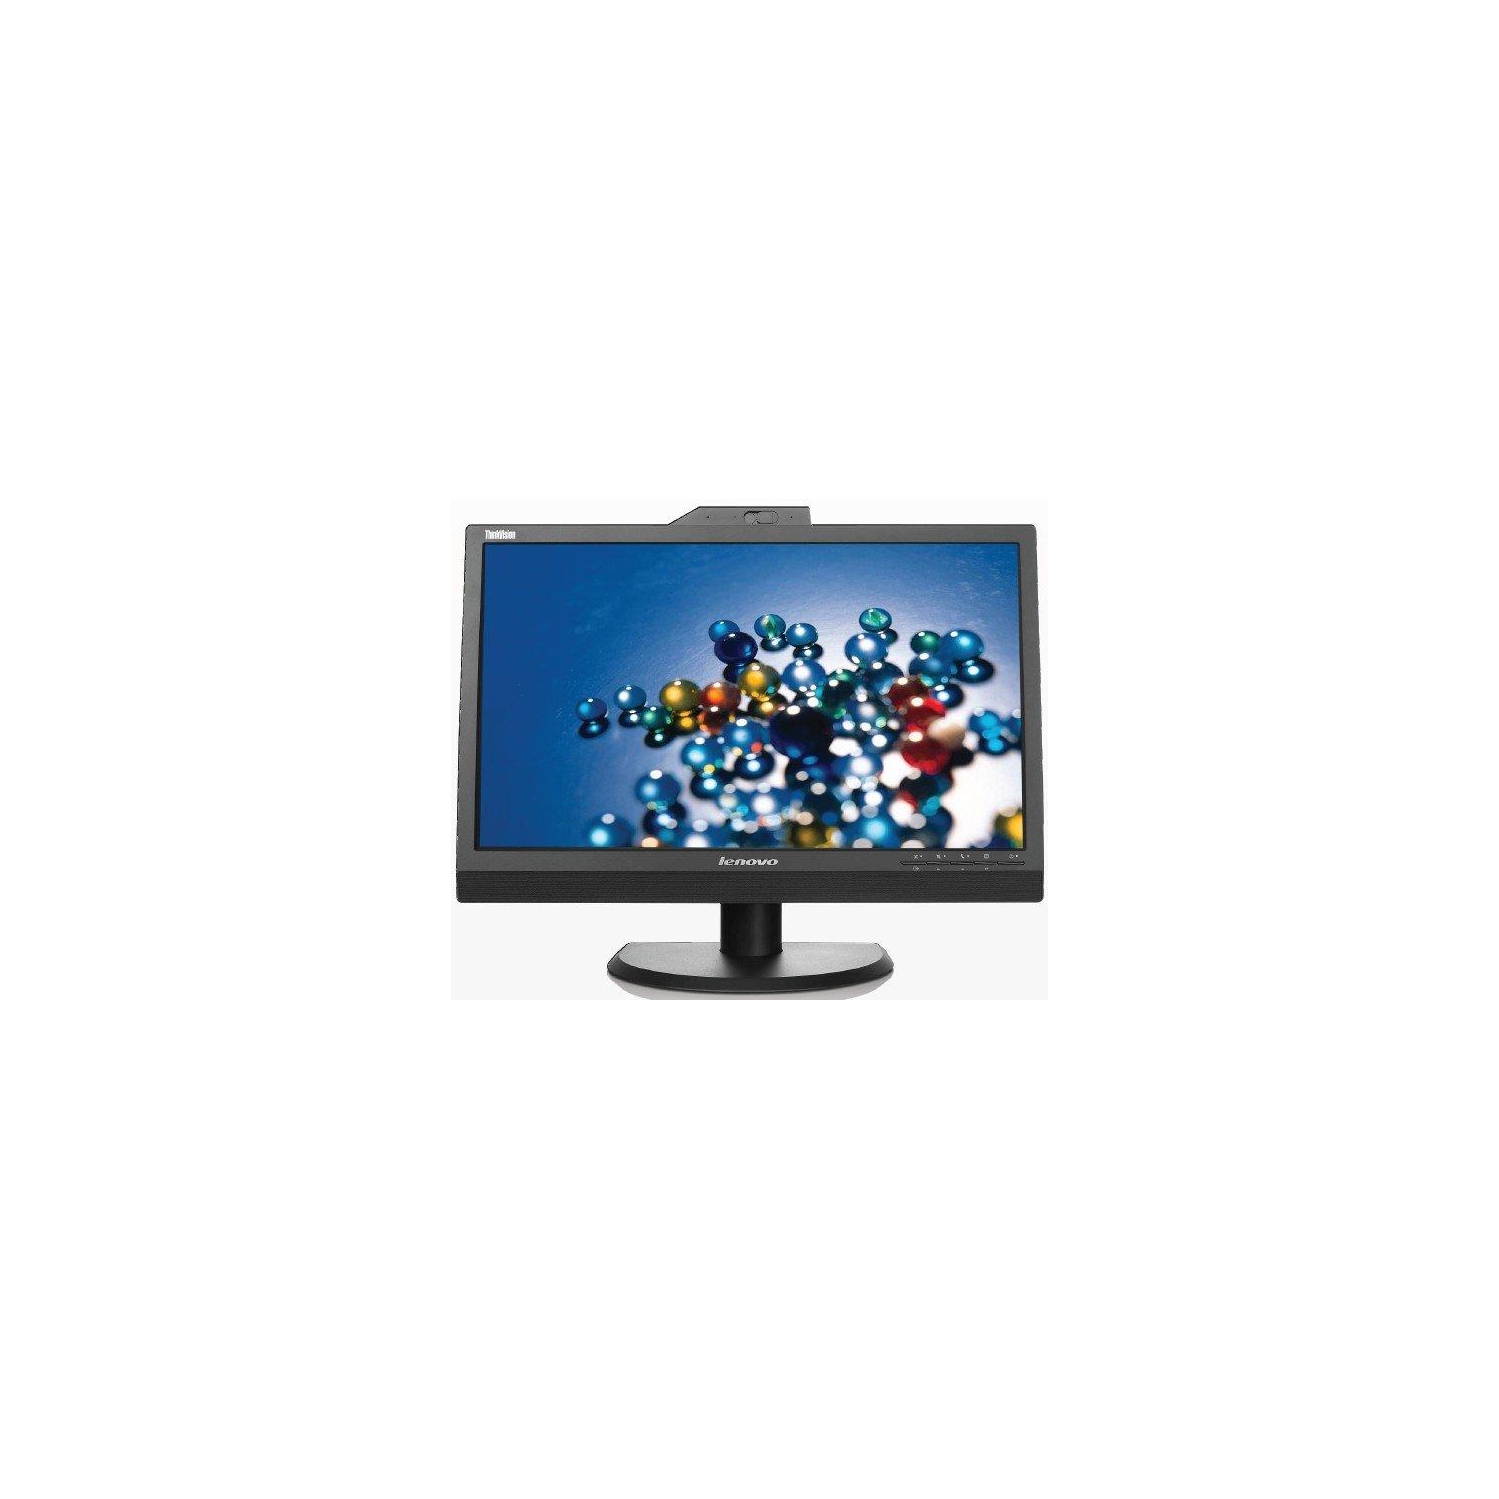 Refurbished (Excellent) - Lenovo LT2223ZWC 21.5" 1920x1080 Widescreen LED Backlit LCD Monitor-Web Cam-HDMI-Recertified